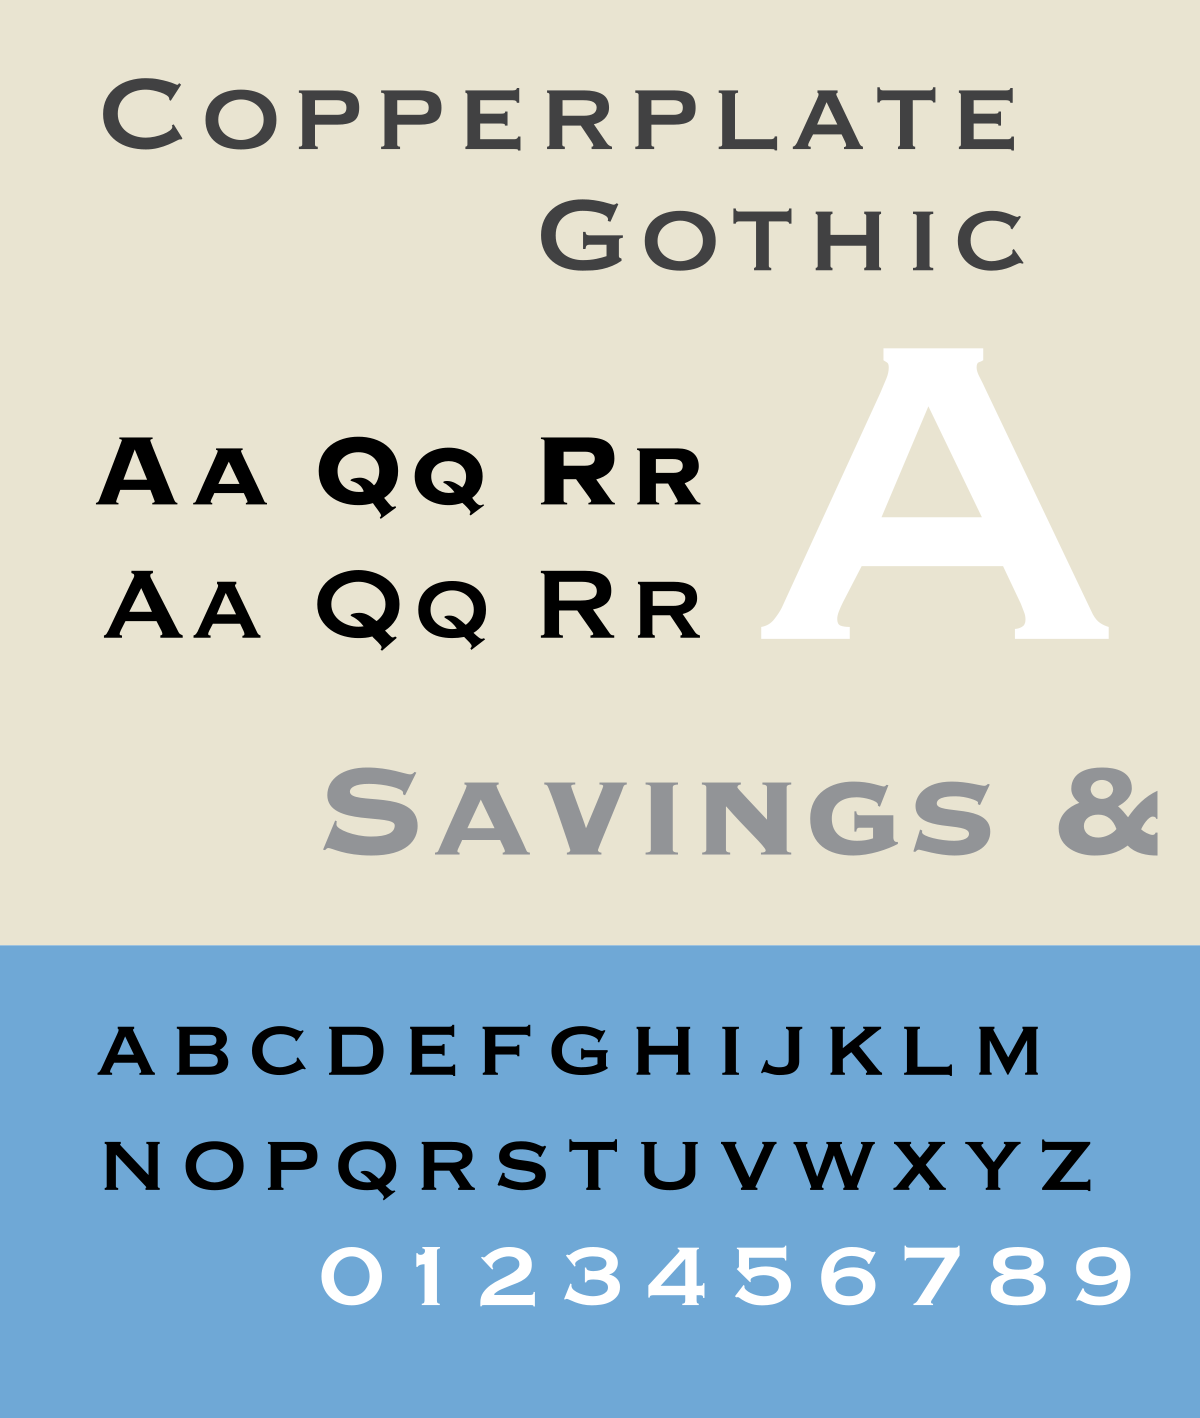 Police Copperplate Gothic